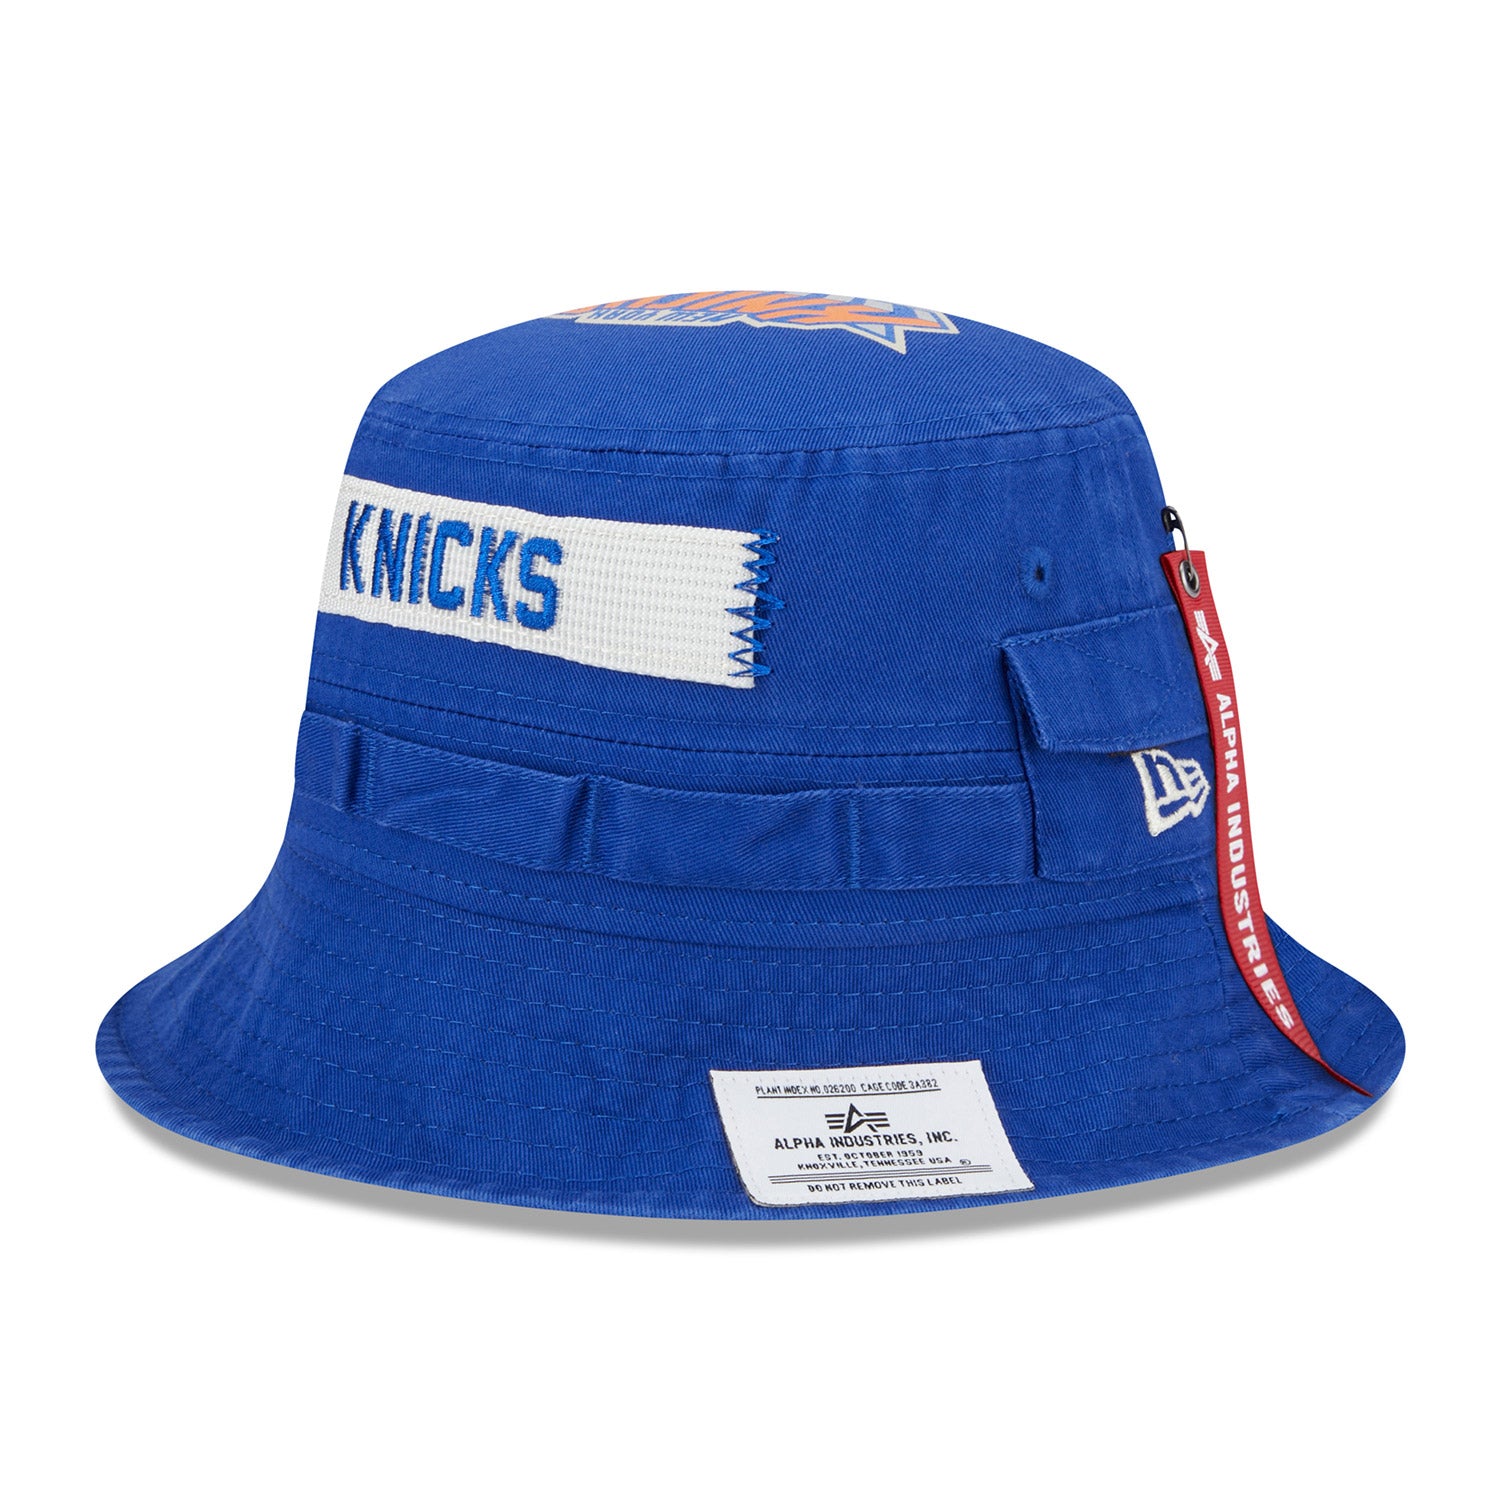 New Era Knicks Alpha Collection Bucket Hat In Blue - Angled Left Side View